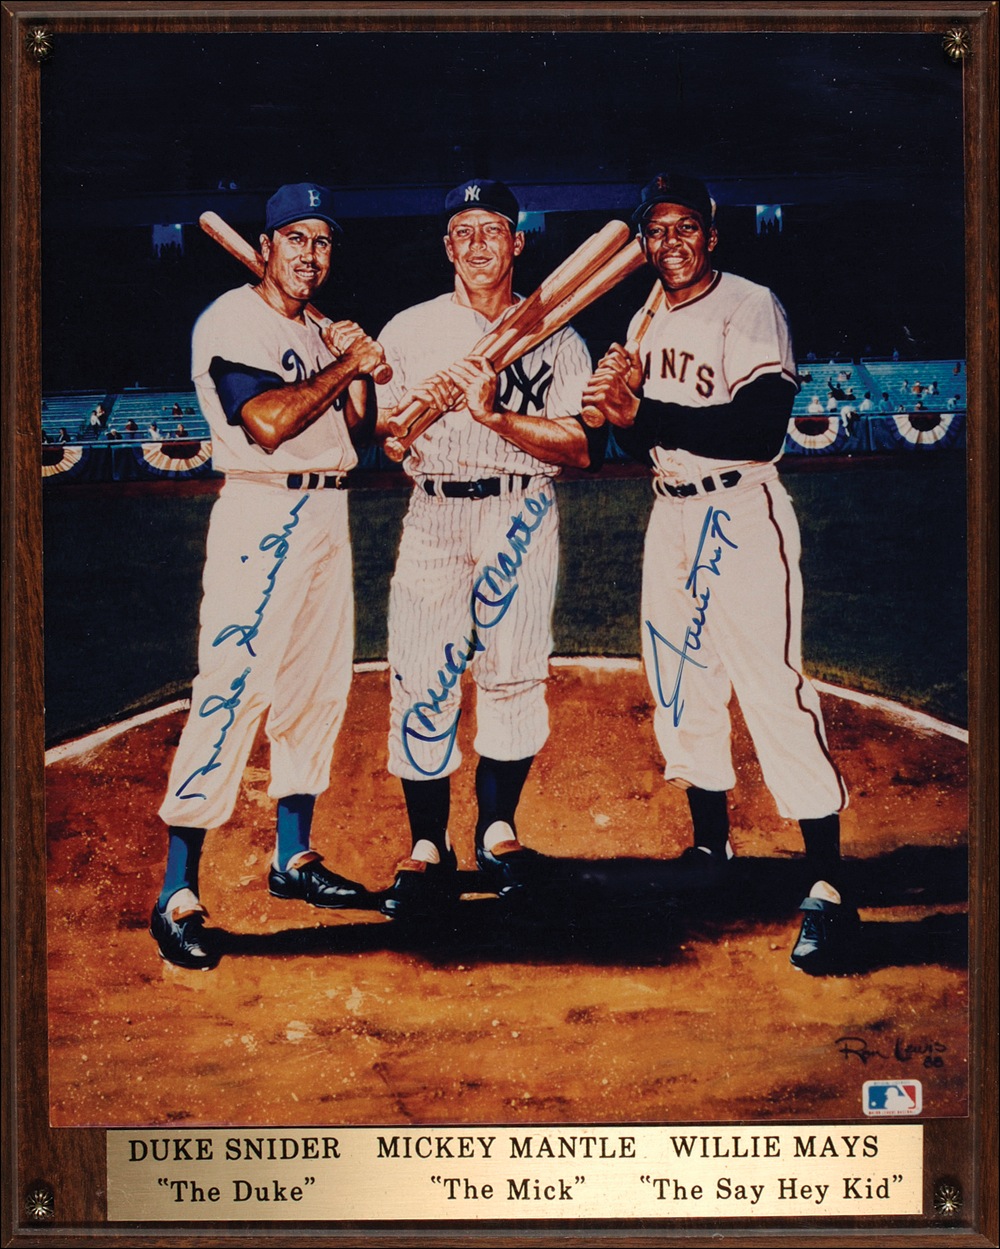 Lot #1436 Mantle, Mays, and Snider